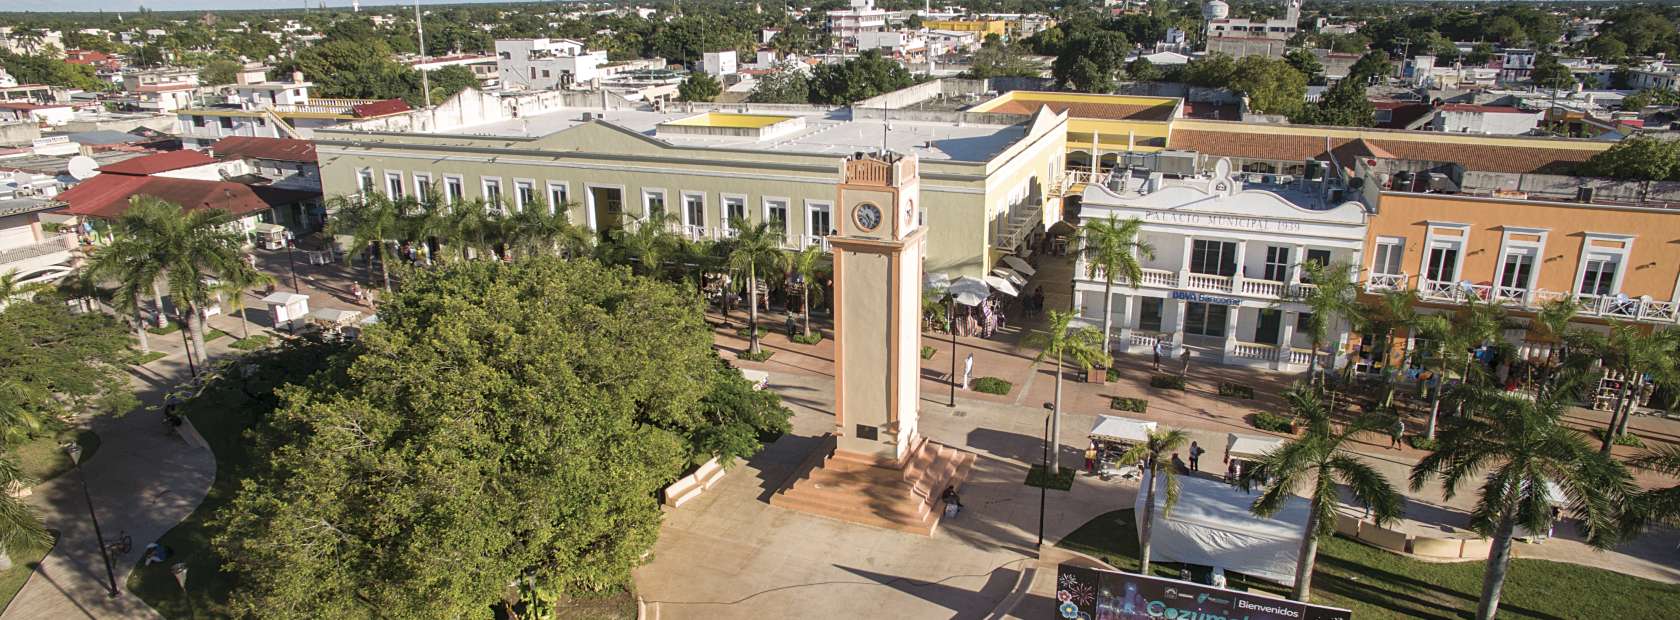 Cozumel Town Plaza Aerial